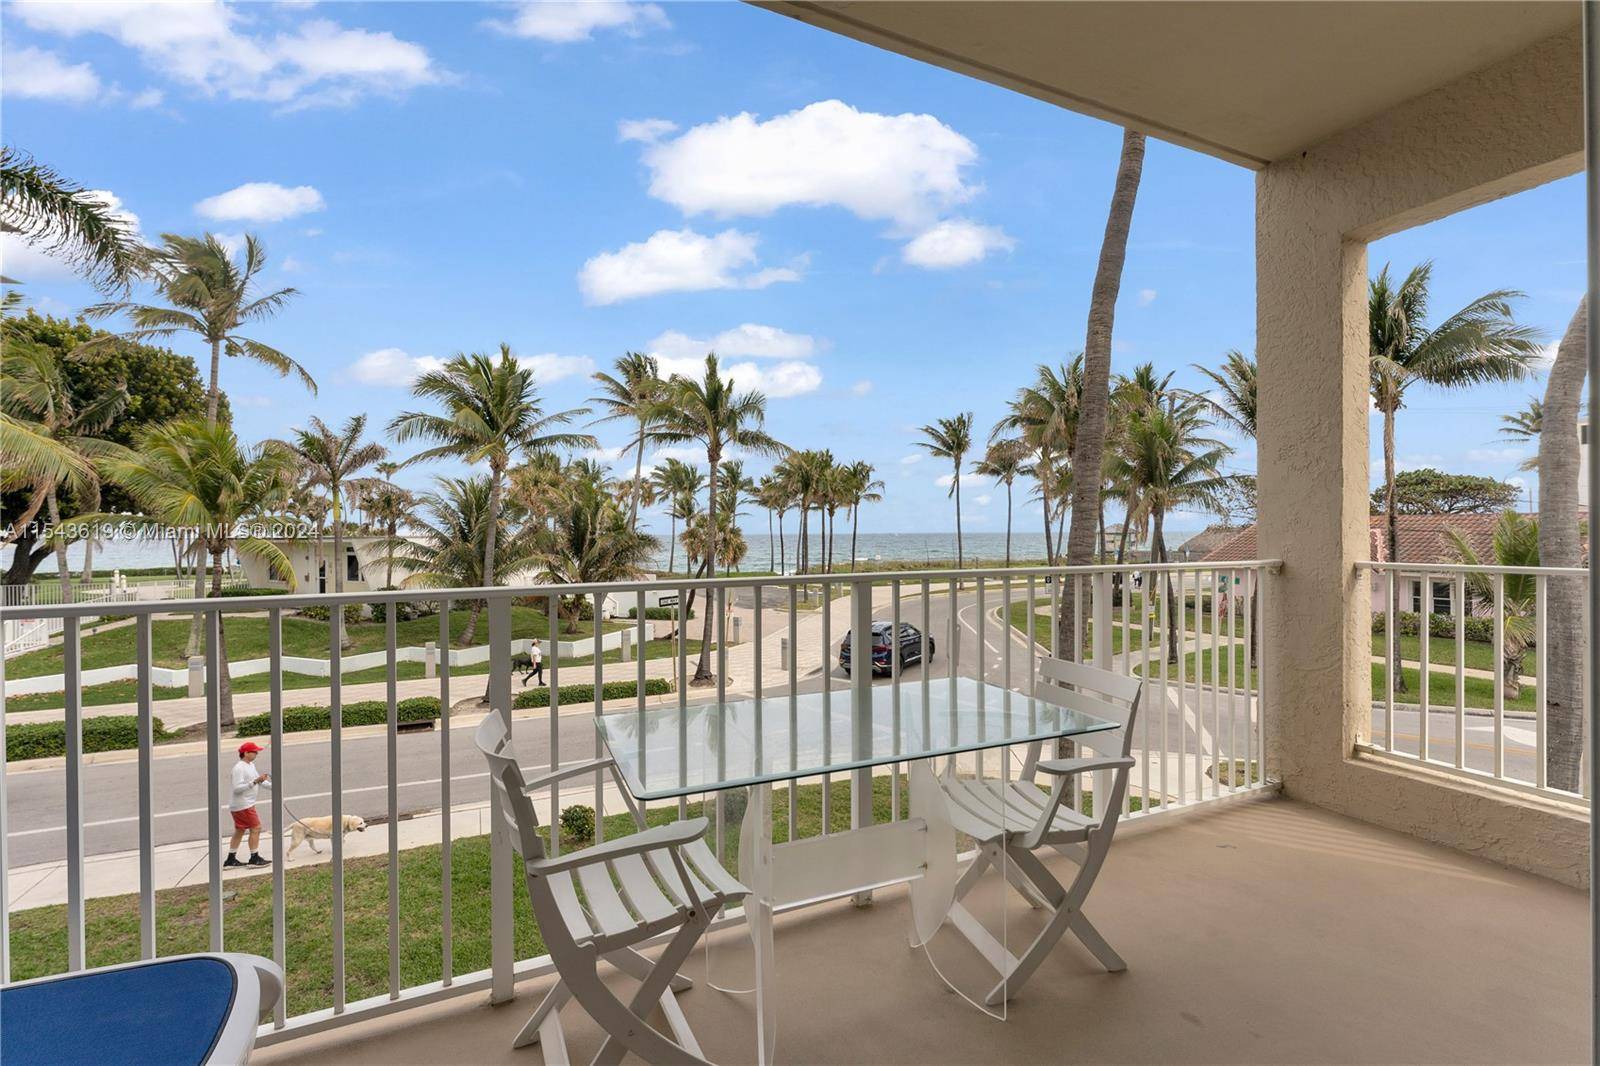 Step Inside with Me ! THE BREATHTAKING OCEAN VIEW IS PRICELESS from the spacious balcony.